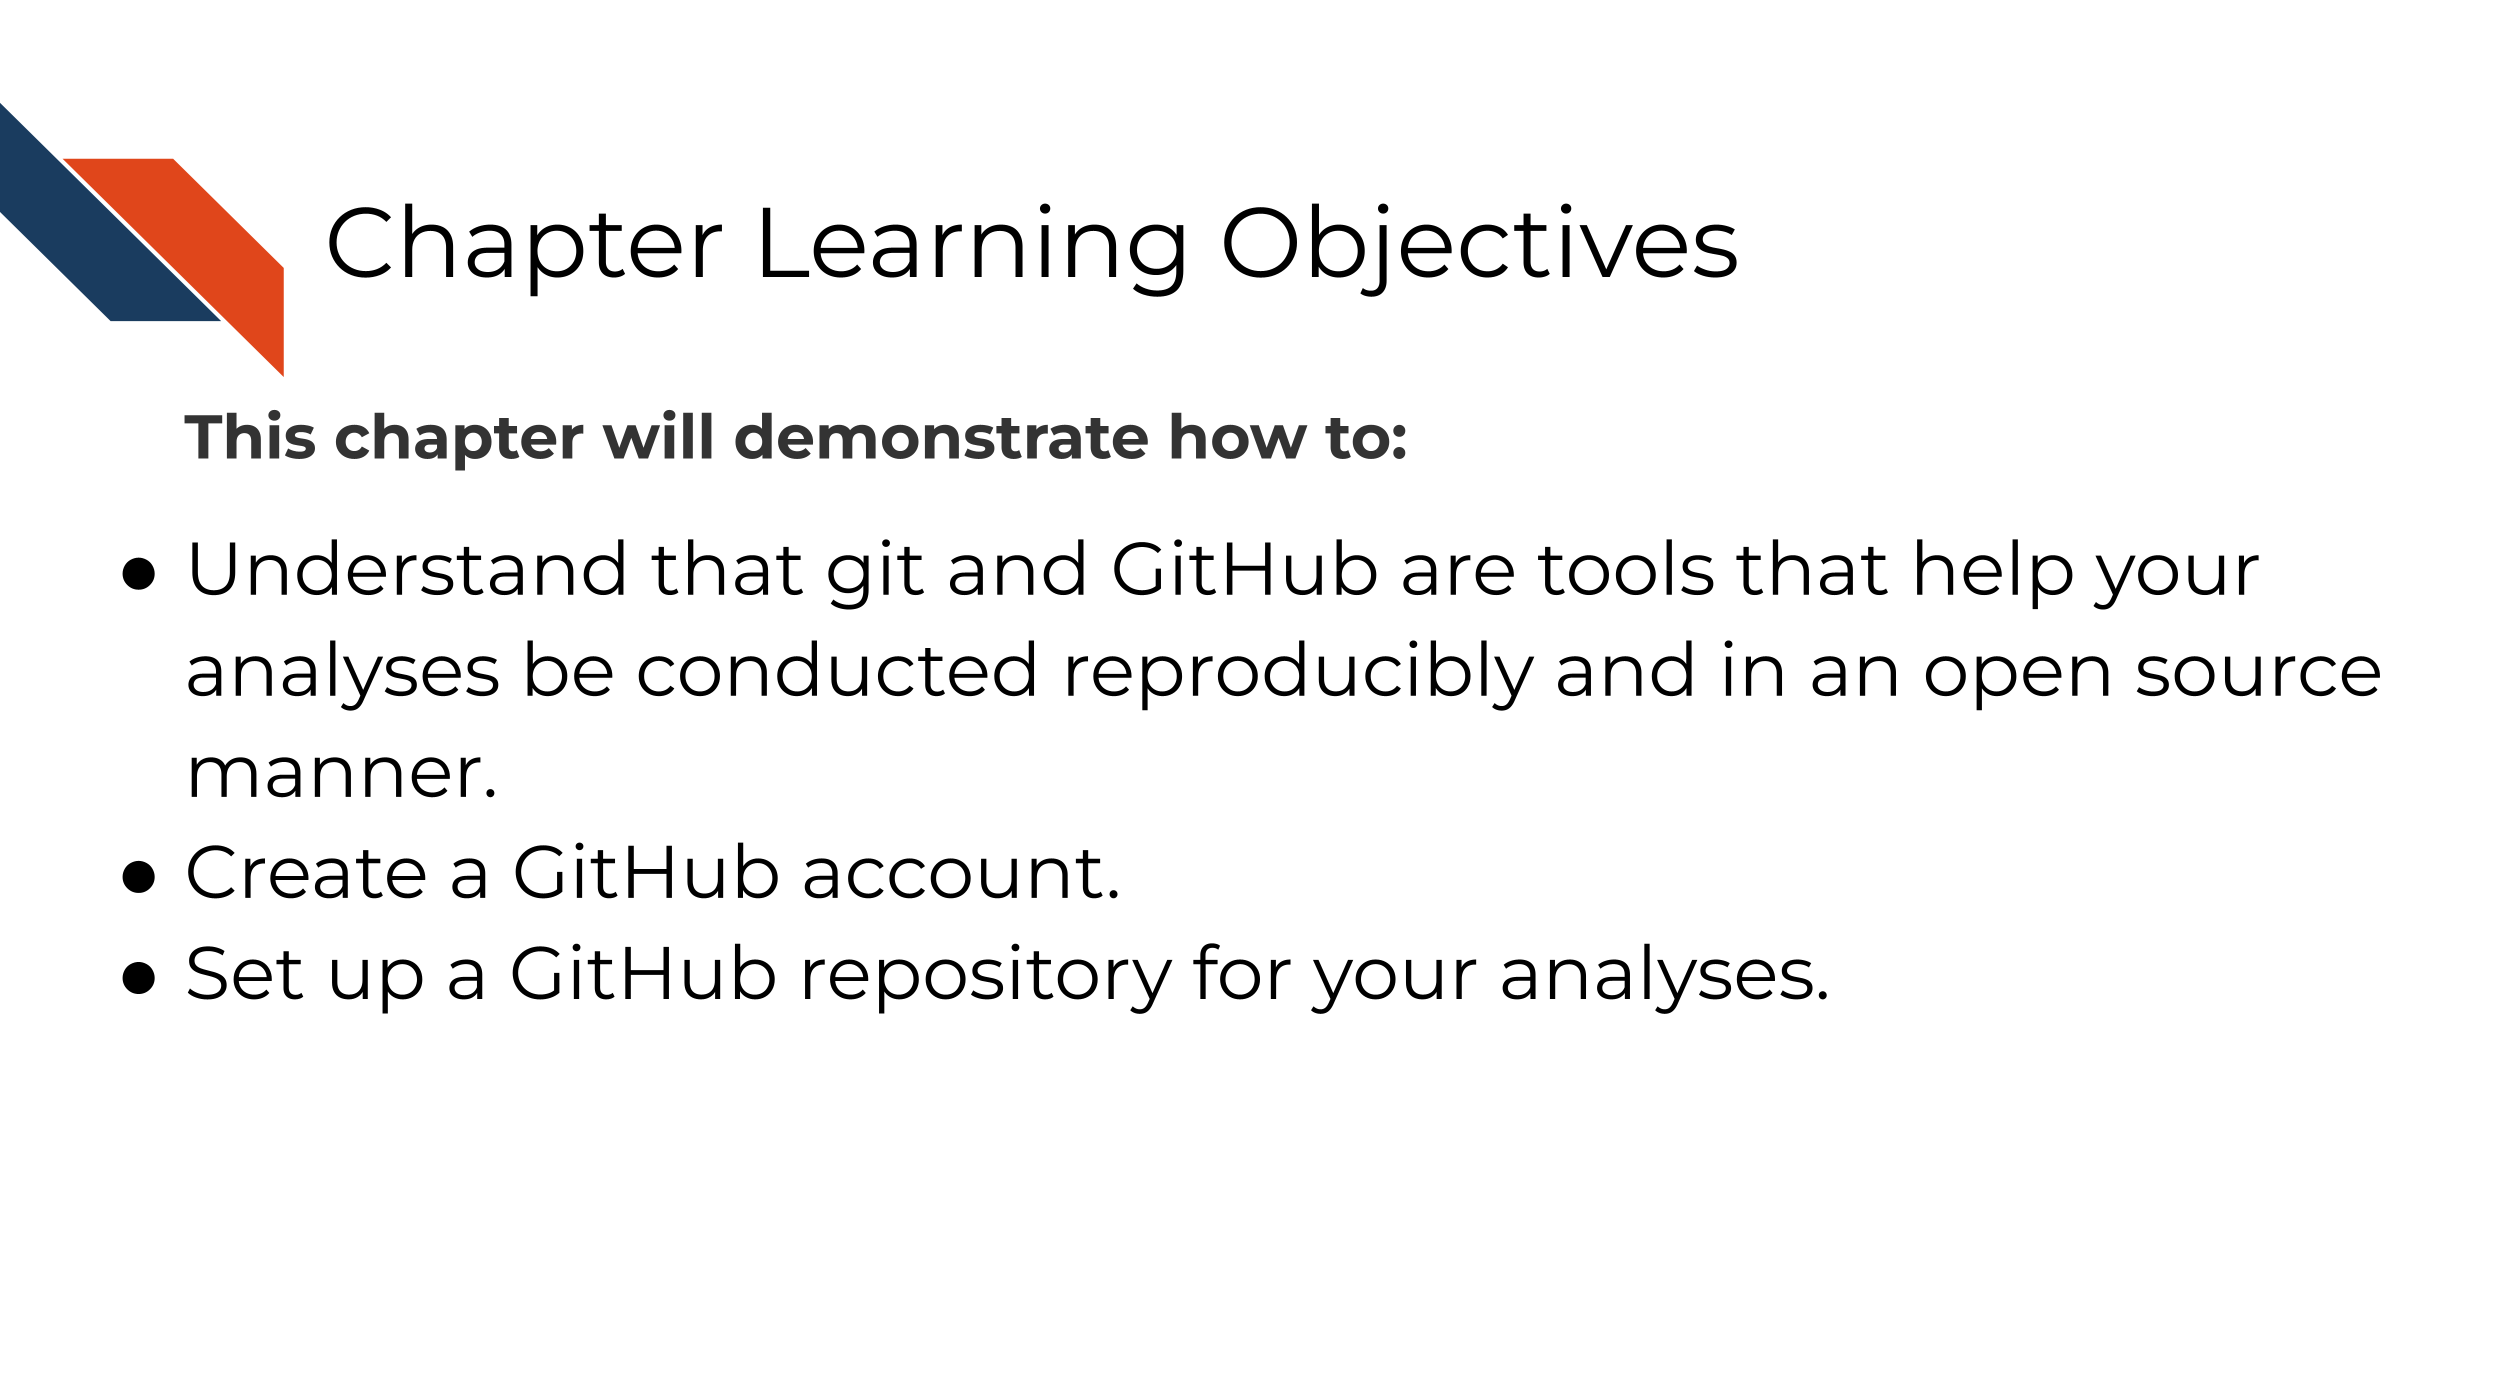 This chapter will demonstrate how to: Understand that git and GitHub are tools that help your analyses be conducted reproducibly and in an open source manner. Create a GitHub account. Set up a GitHub repository for your analyses.